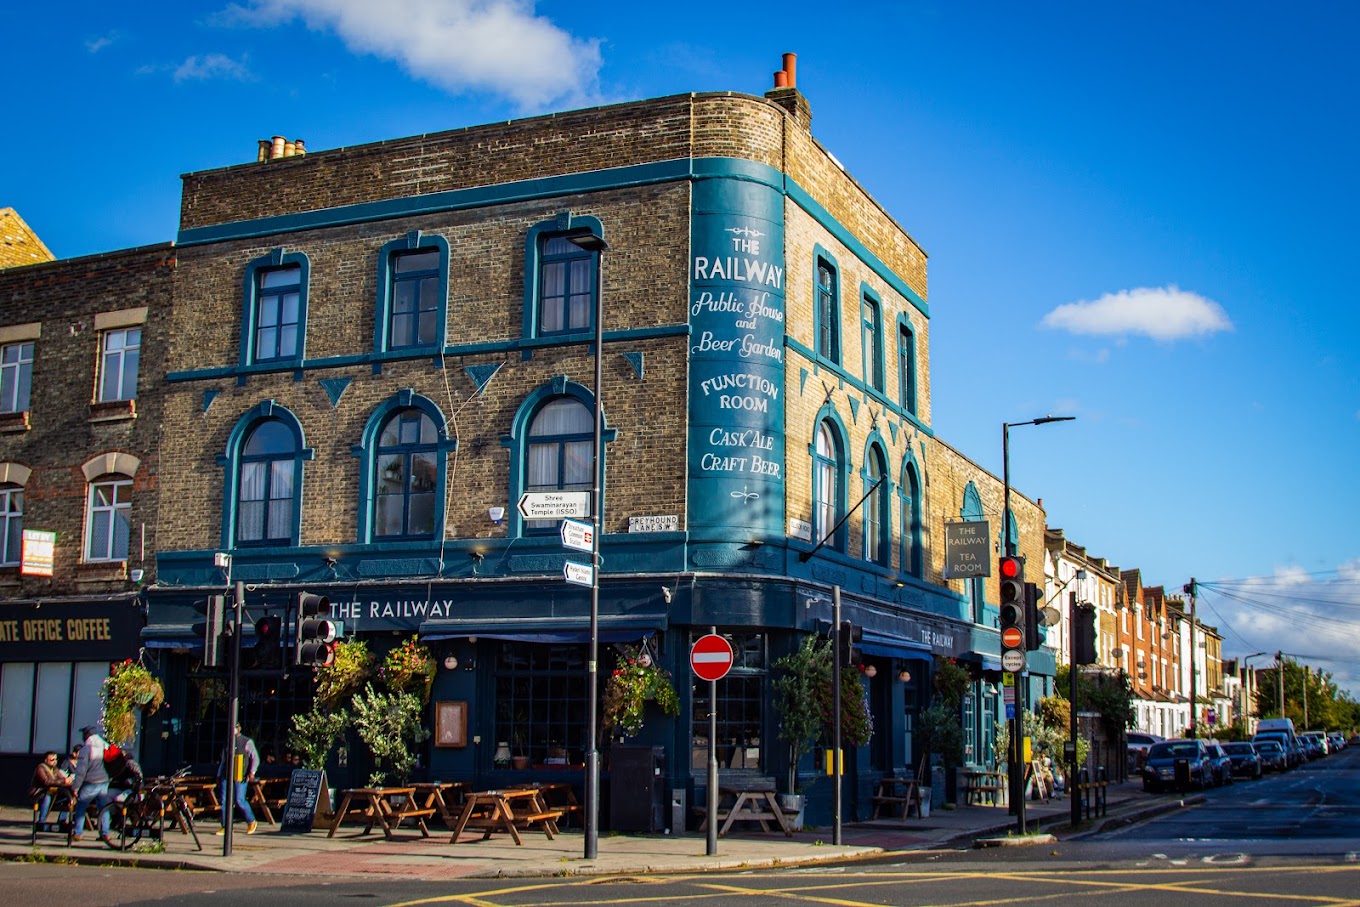 Looking for a great night out in Streatham? Check out our list of the best pubs in the area, featuring cozy traditional pubs, stylish gastropubs, and lively bars. Enjoy delicious food, refreshing drinks, and a warm and welcoming atmosphere. Whether you're a local or just passing through, these pubs are sure to provide a great night out. #Londonpubs | Things To Do In Streatham | Best Pubs In London | Things To Do In London | Best Sunday Roast | Best Pub Lunch In London | Things To Do In Streatham